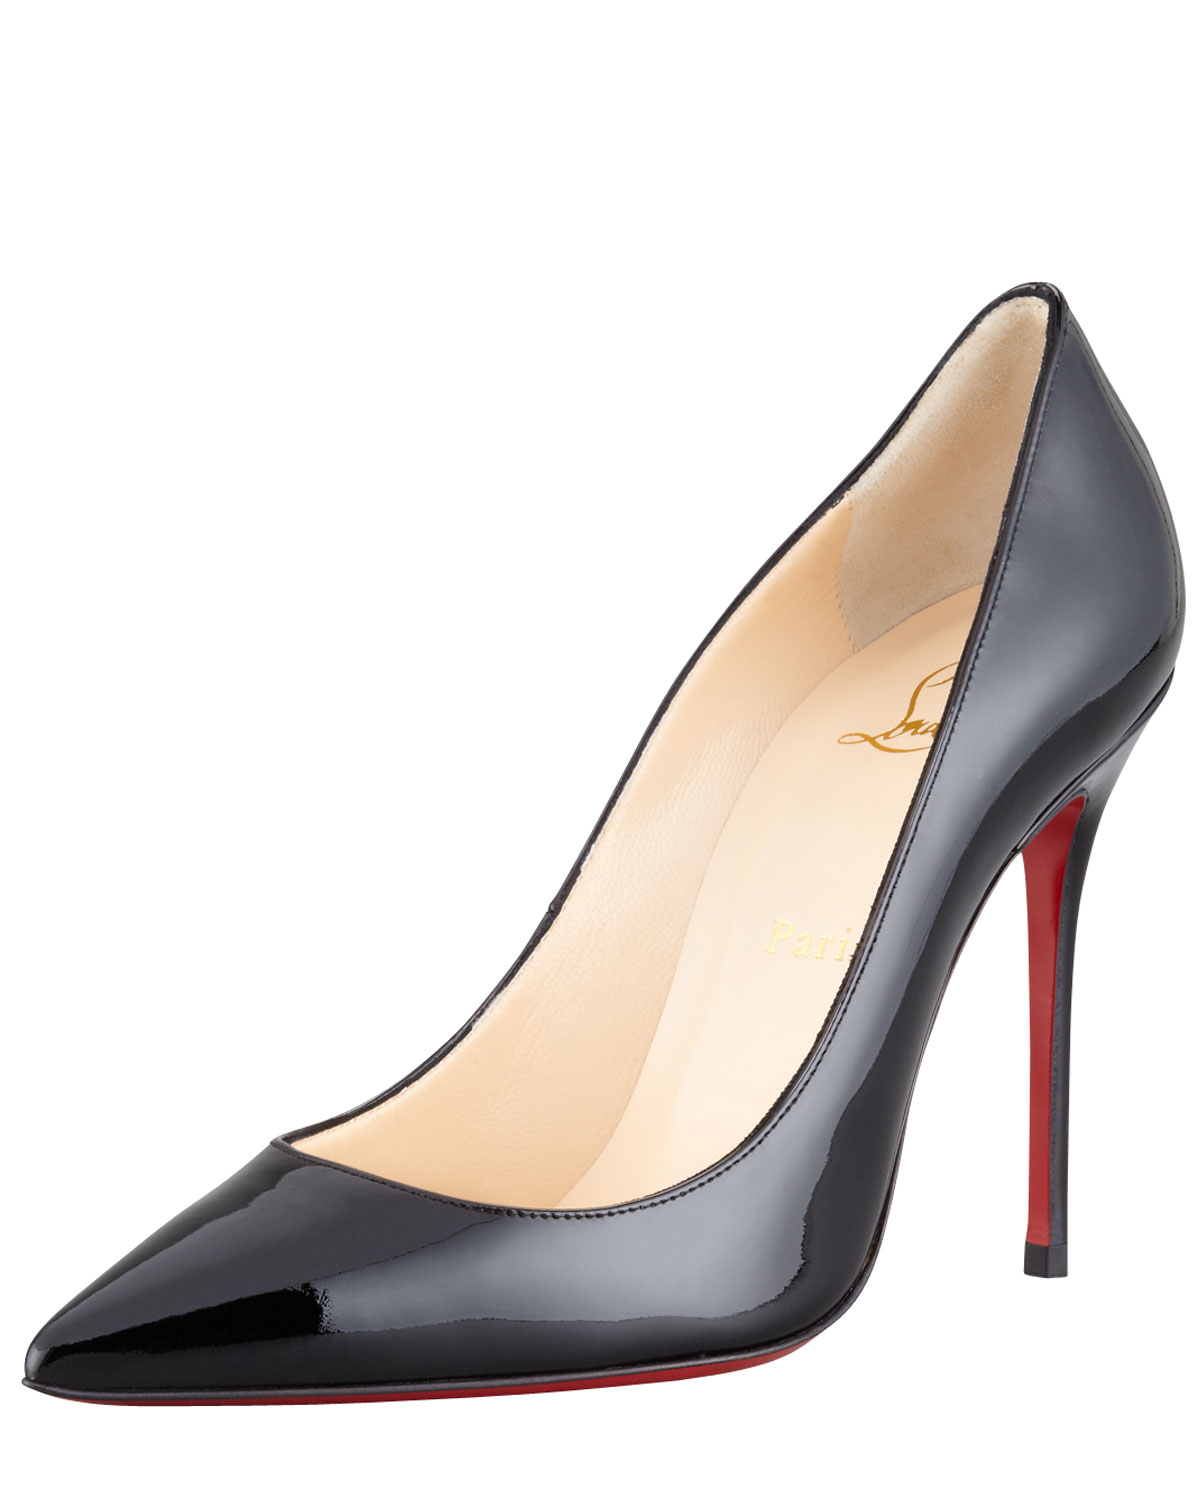 Christian Louboutin Decollete Patent Leather Stiletto Red Sole Pump in ...